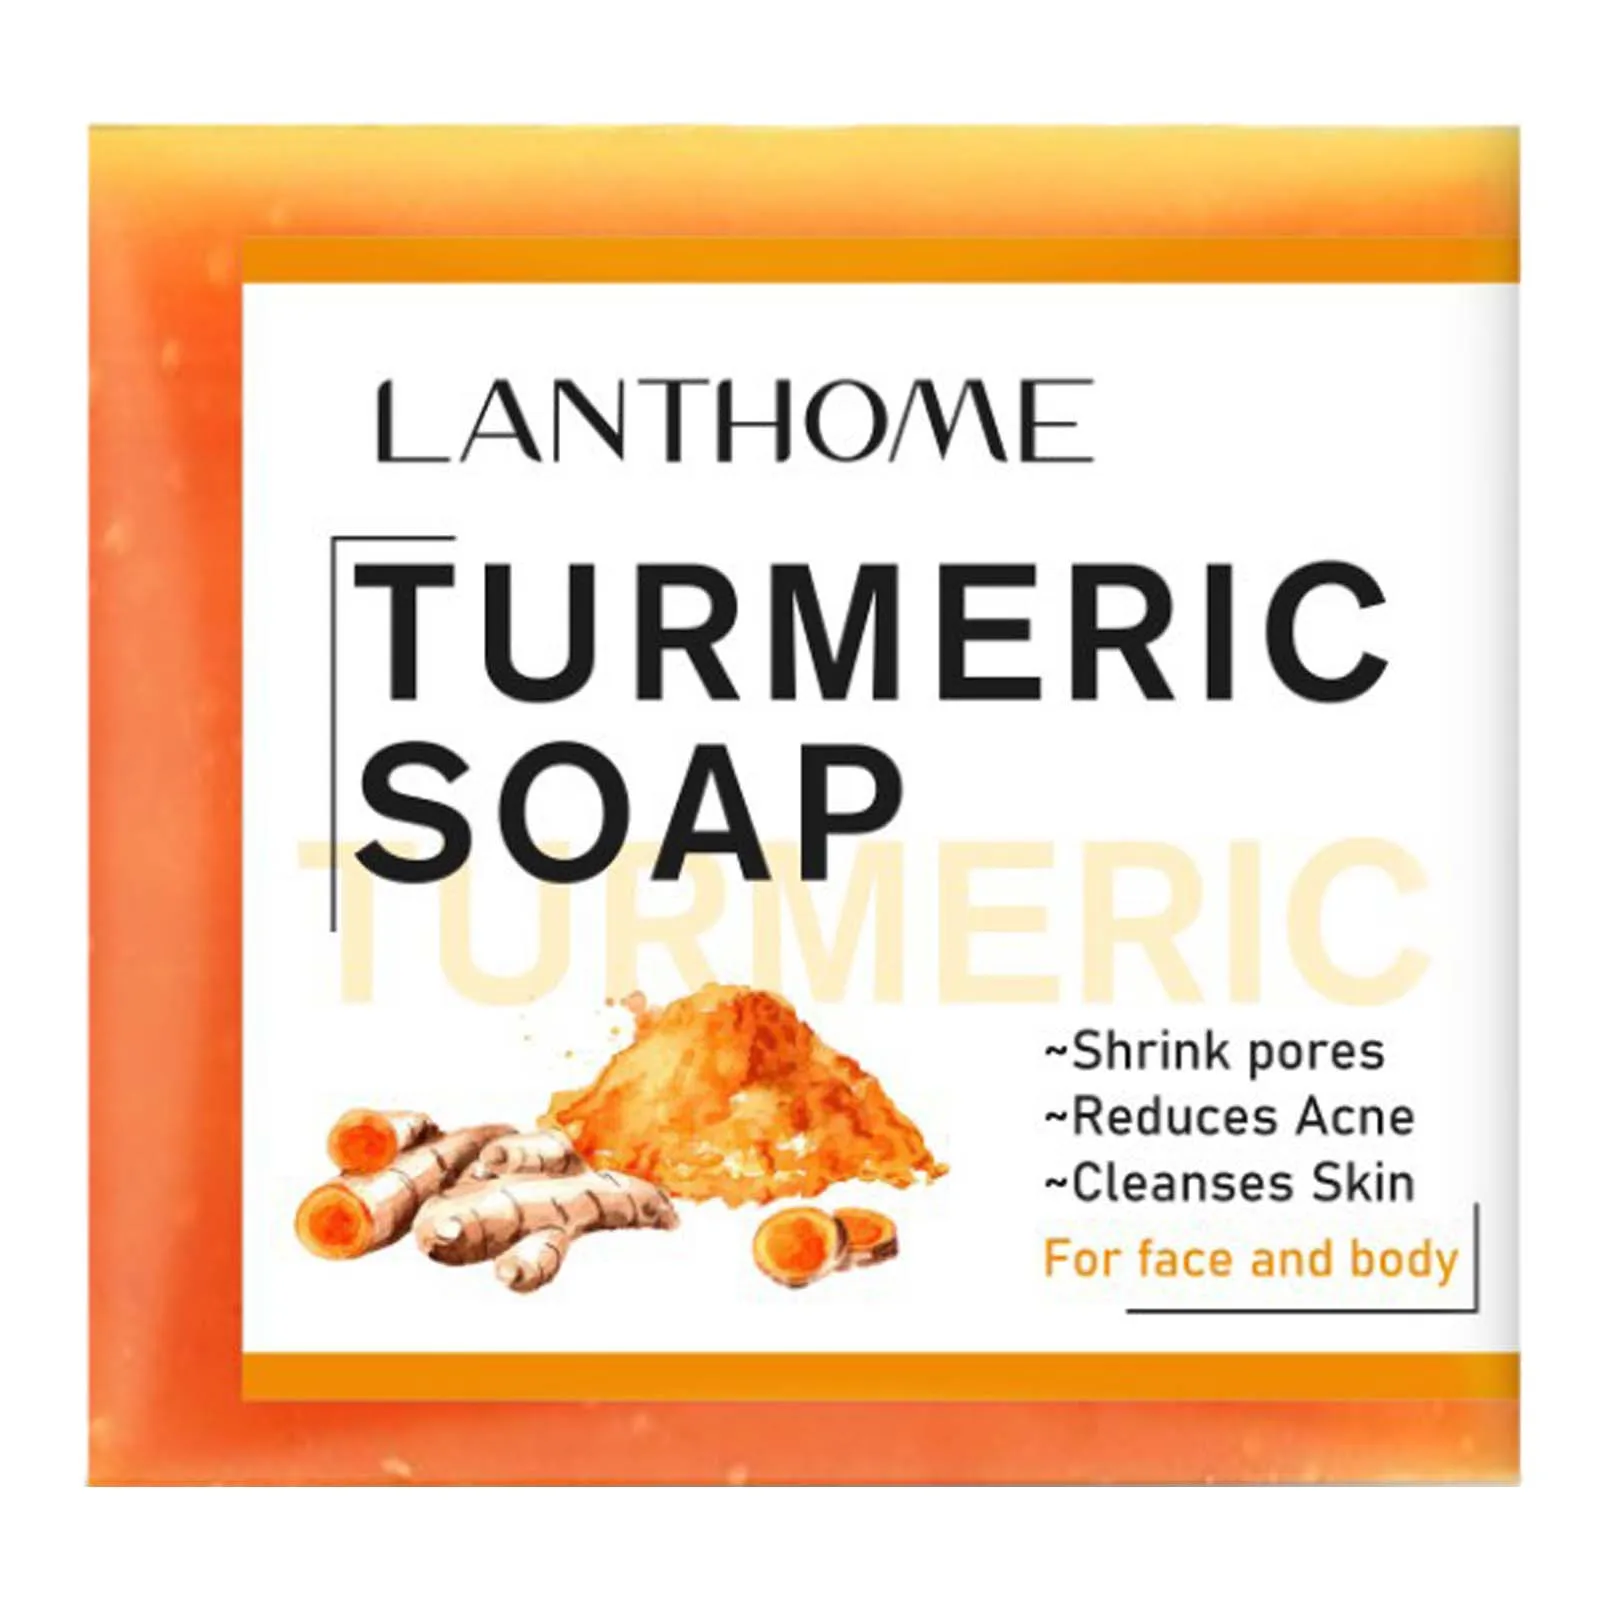 

Turmeric Soap Natural To Lightening Acne Dark Spots Skin -Glow Brighter Scars Removal Bars Herbal Natural Scrub Cleaning